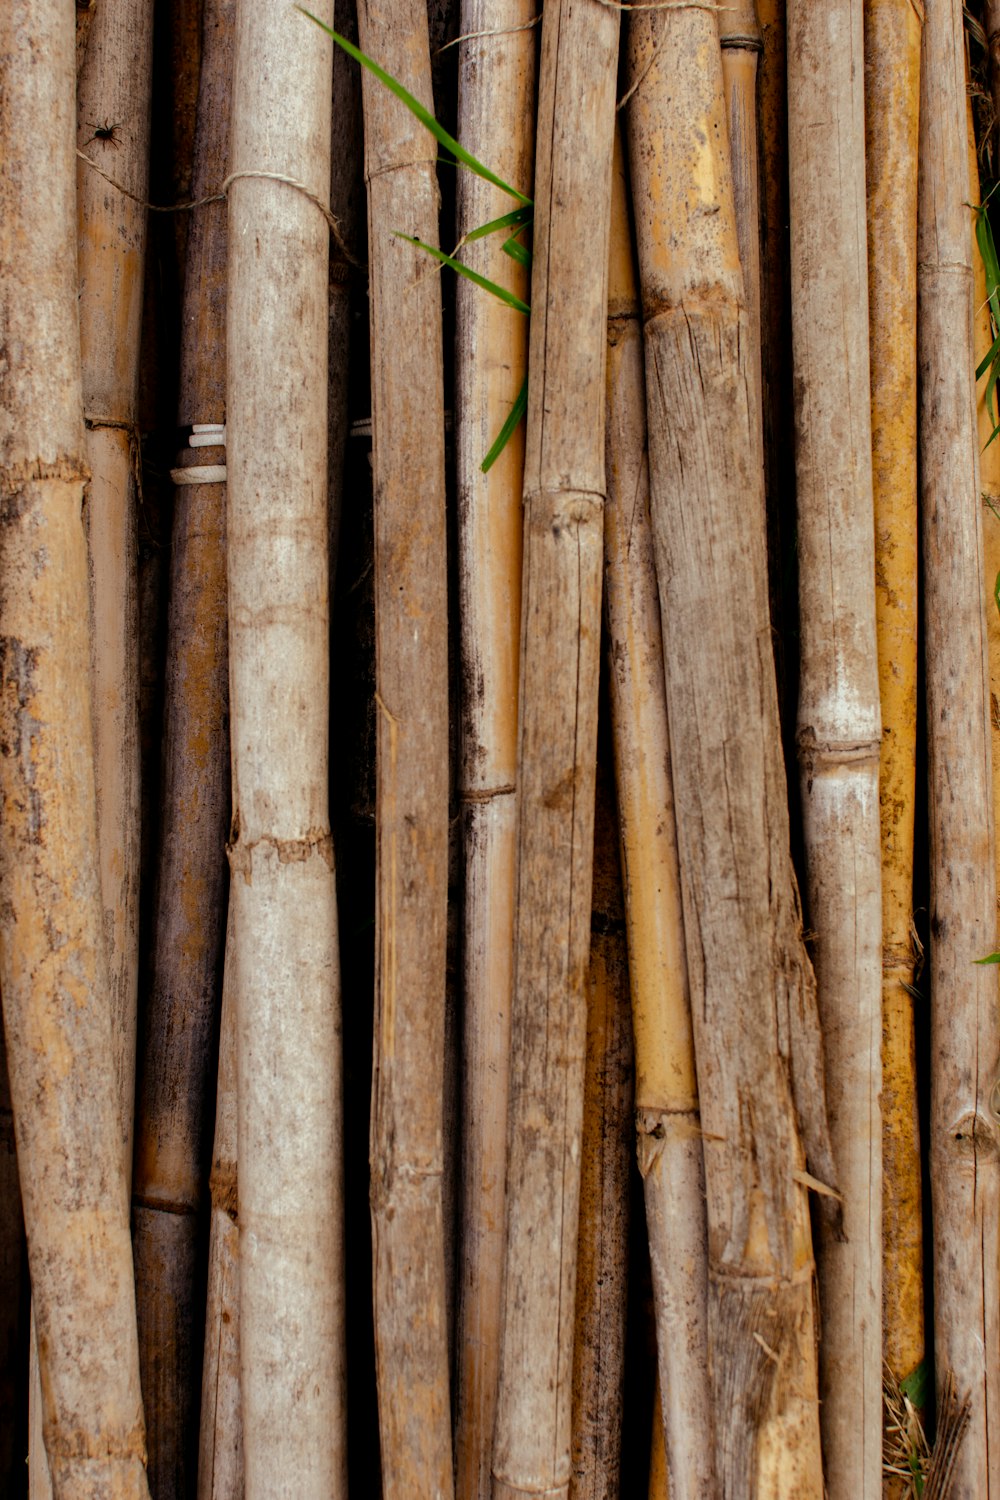 a group of bamboo